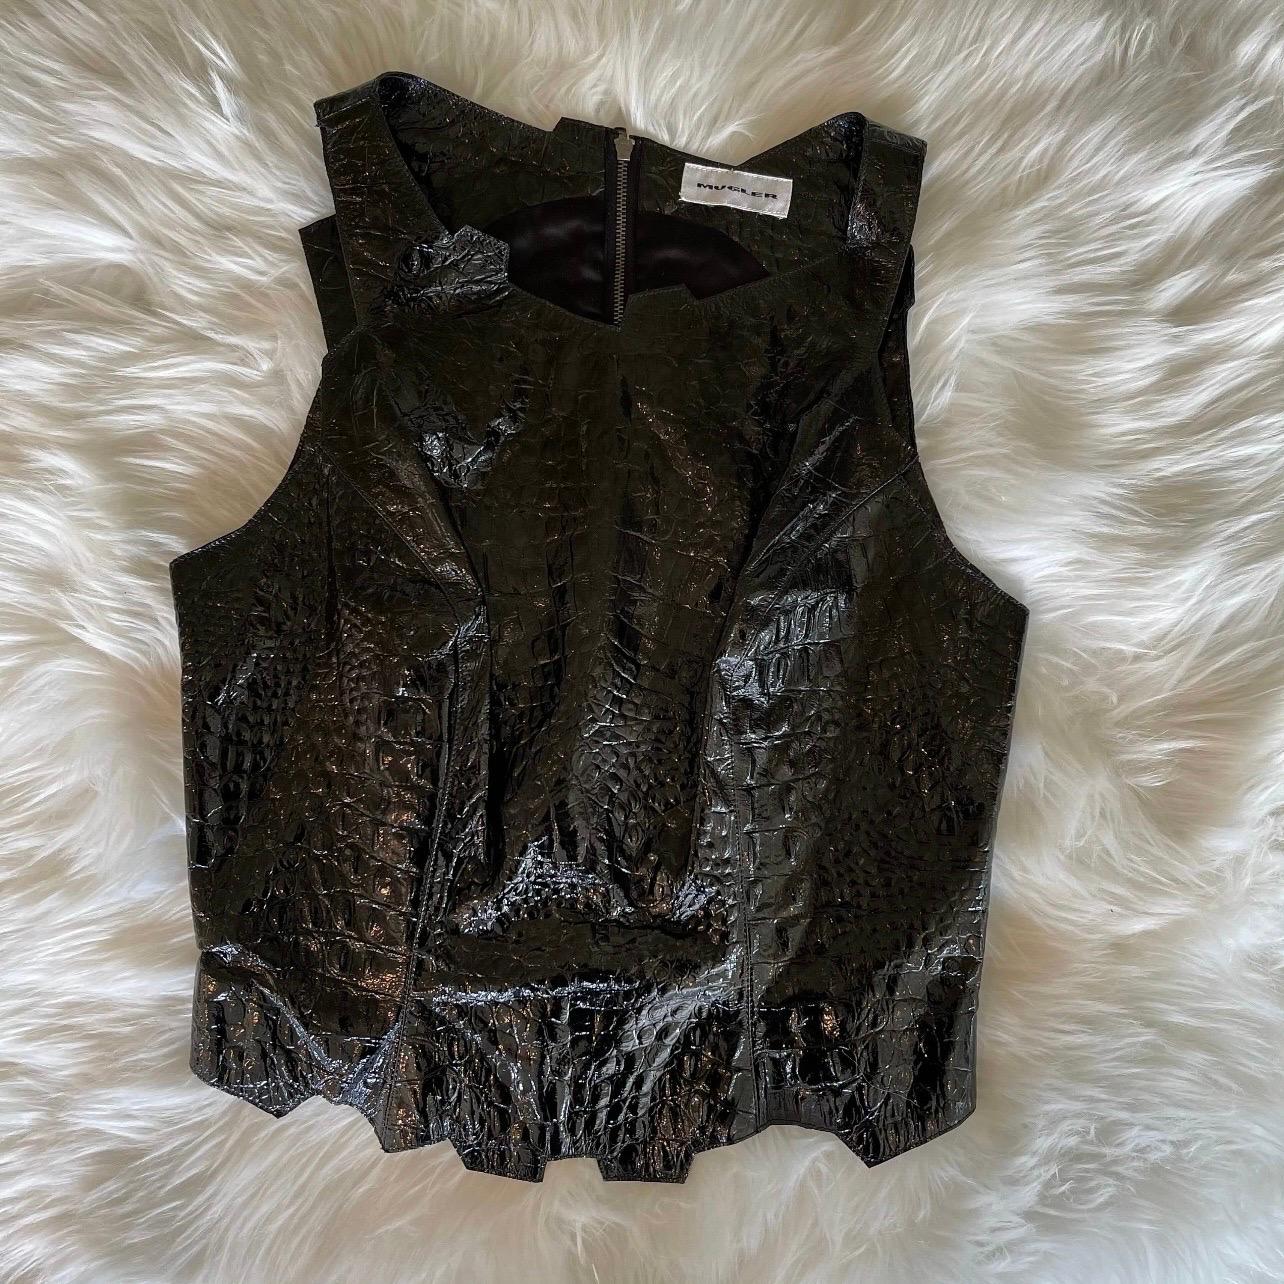 🖤Totally ICONIC Collectors Piece!!🖤

Sz 2 - 4 

Stunning and SUPER rare vintage Mugler wet look embossed patent leather vest. Jagged edges at neckline and hem give this an edgy yet feminine look. 

Body hugging style zips at the back, and gives